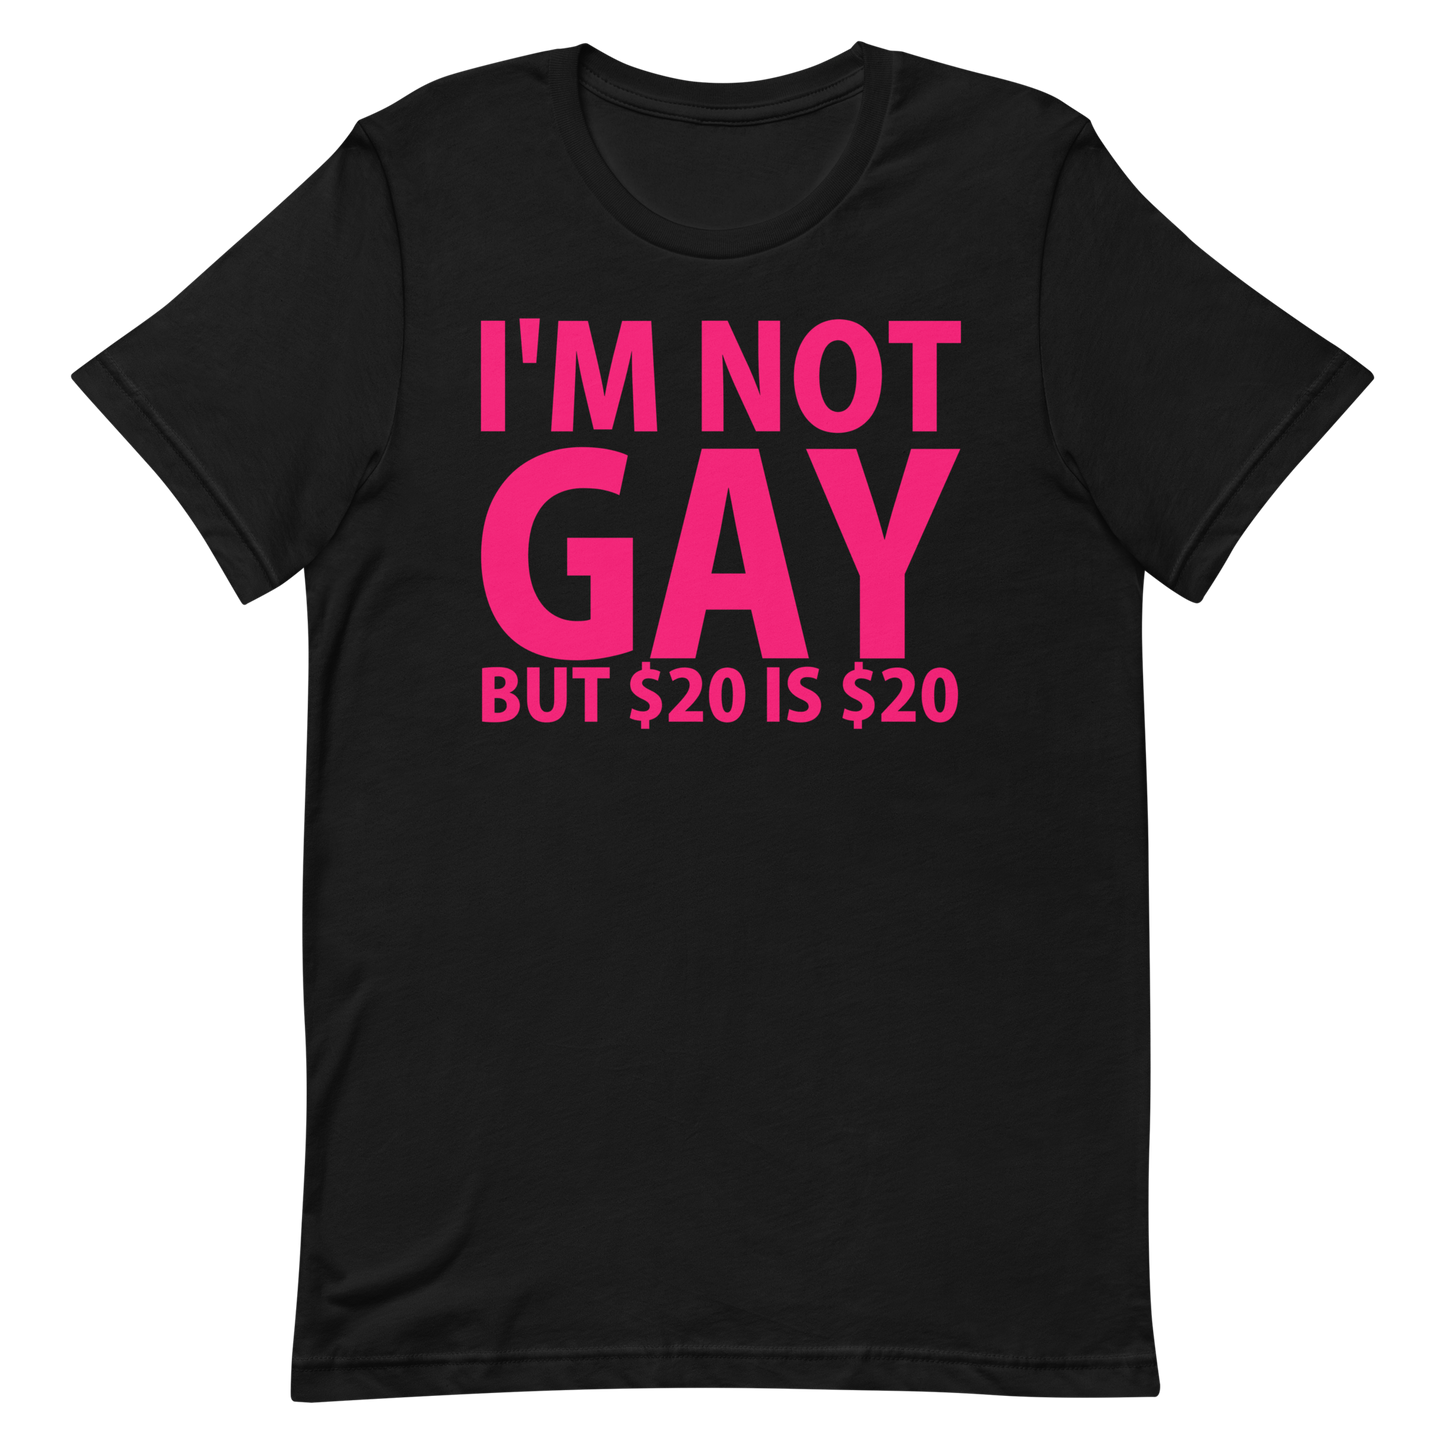 I'm Not Gay But $20 is $20 T-Shirt - Black